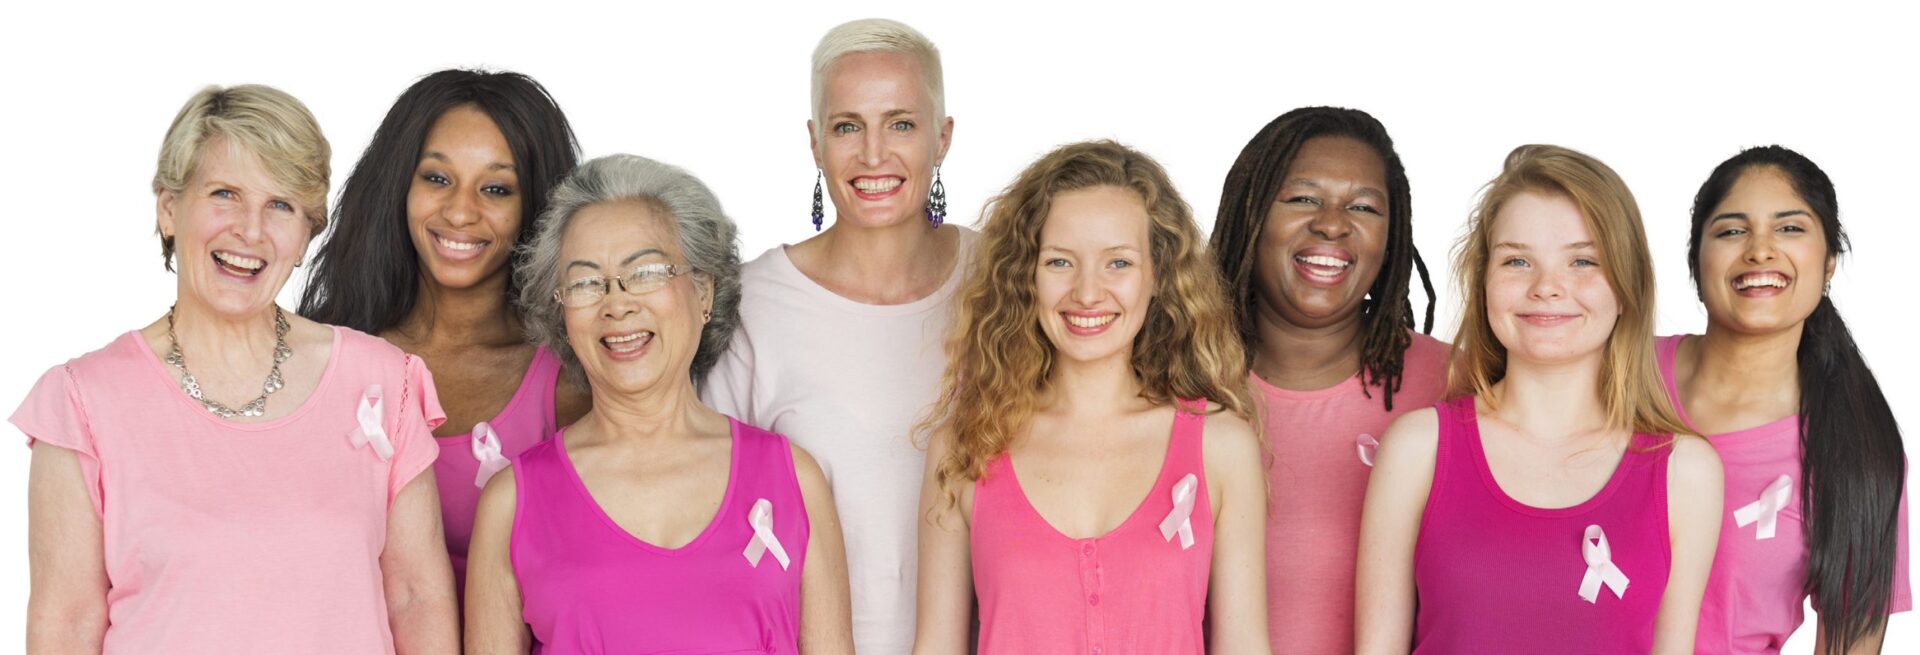 group of women all dressed in pink.